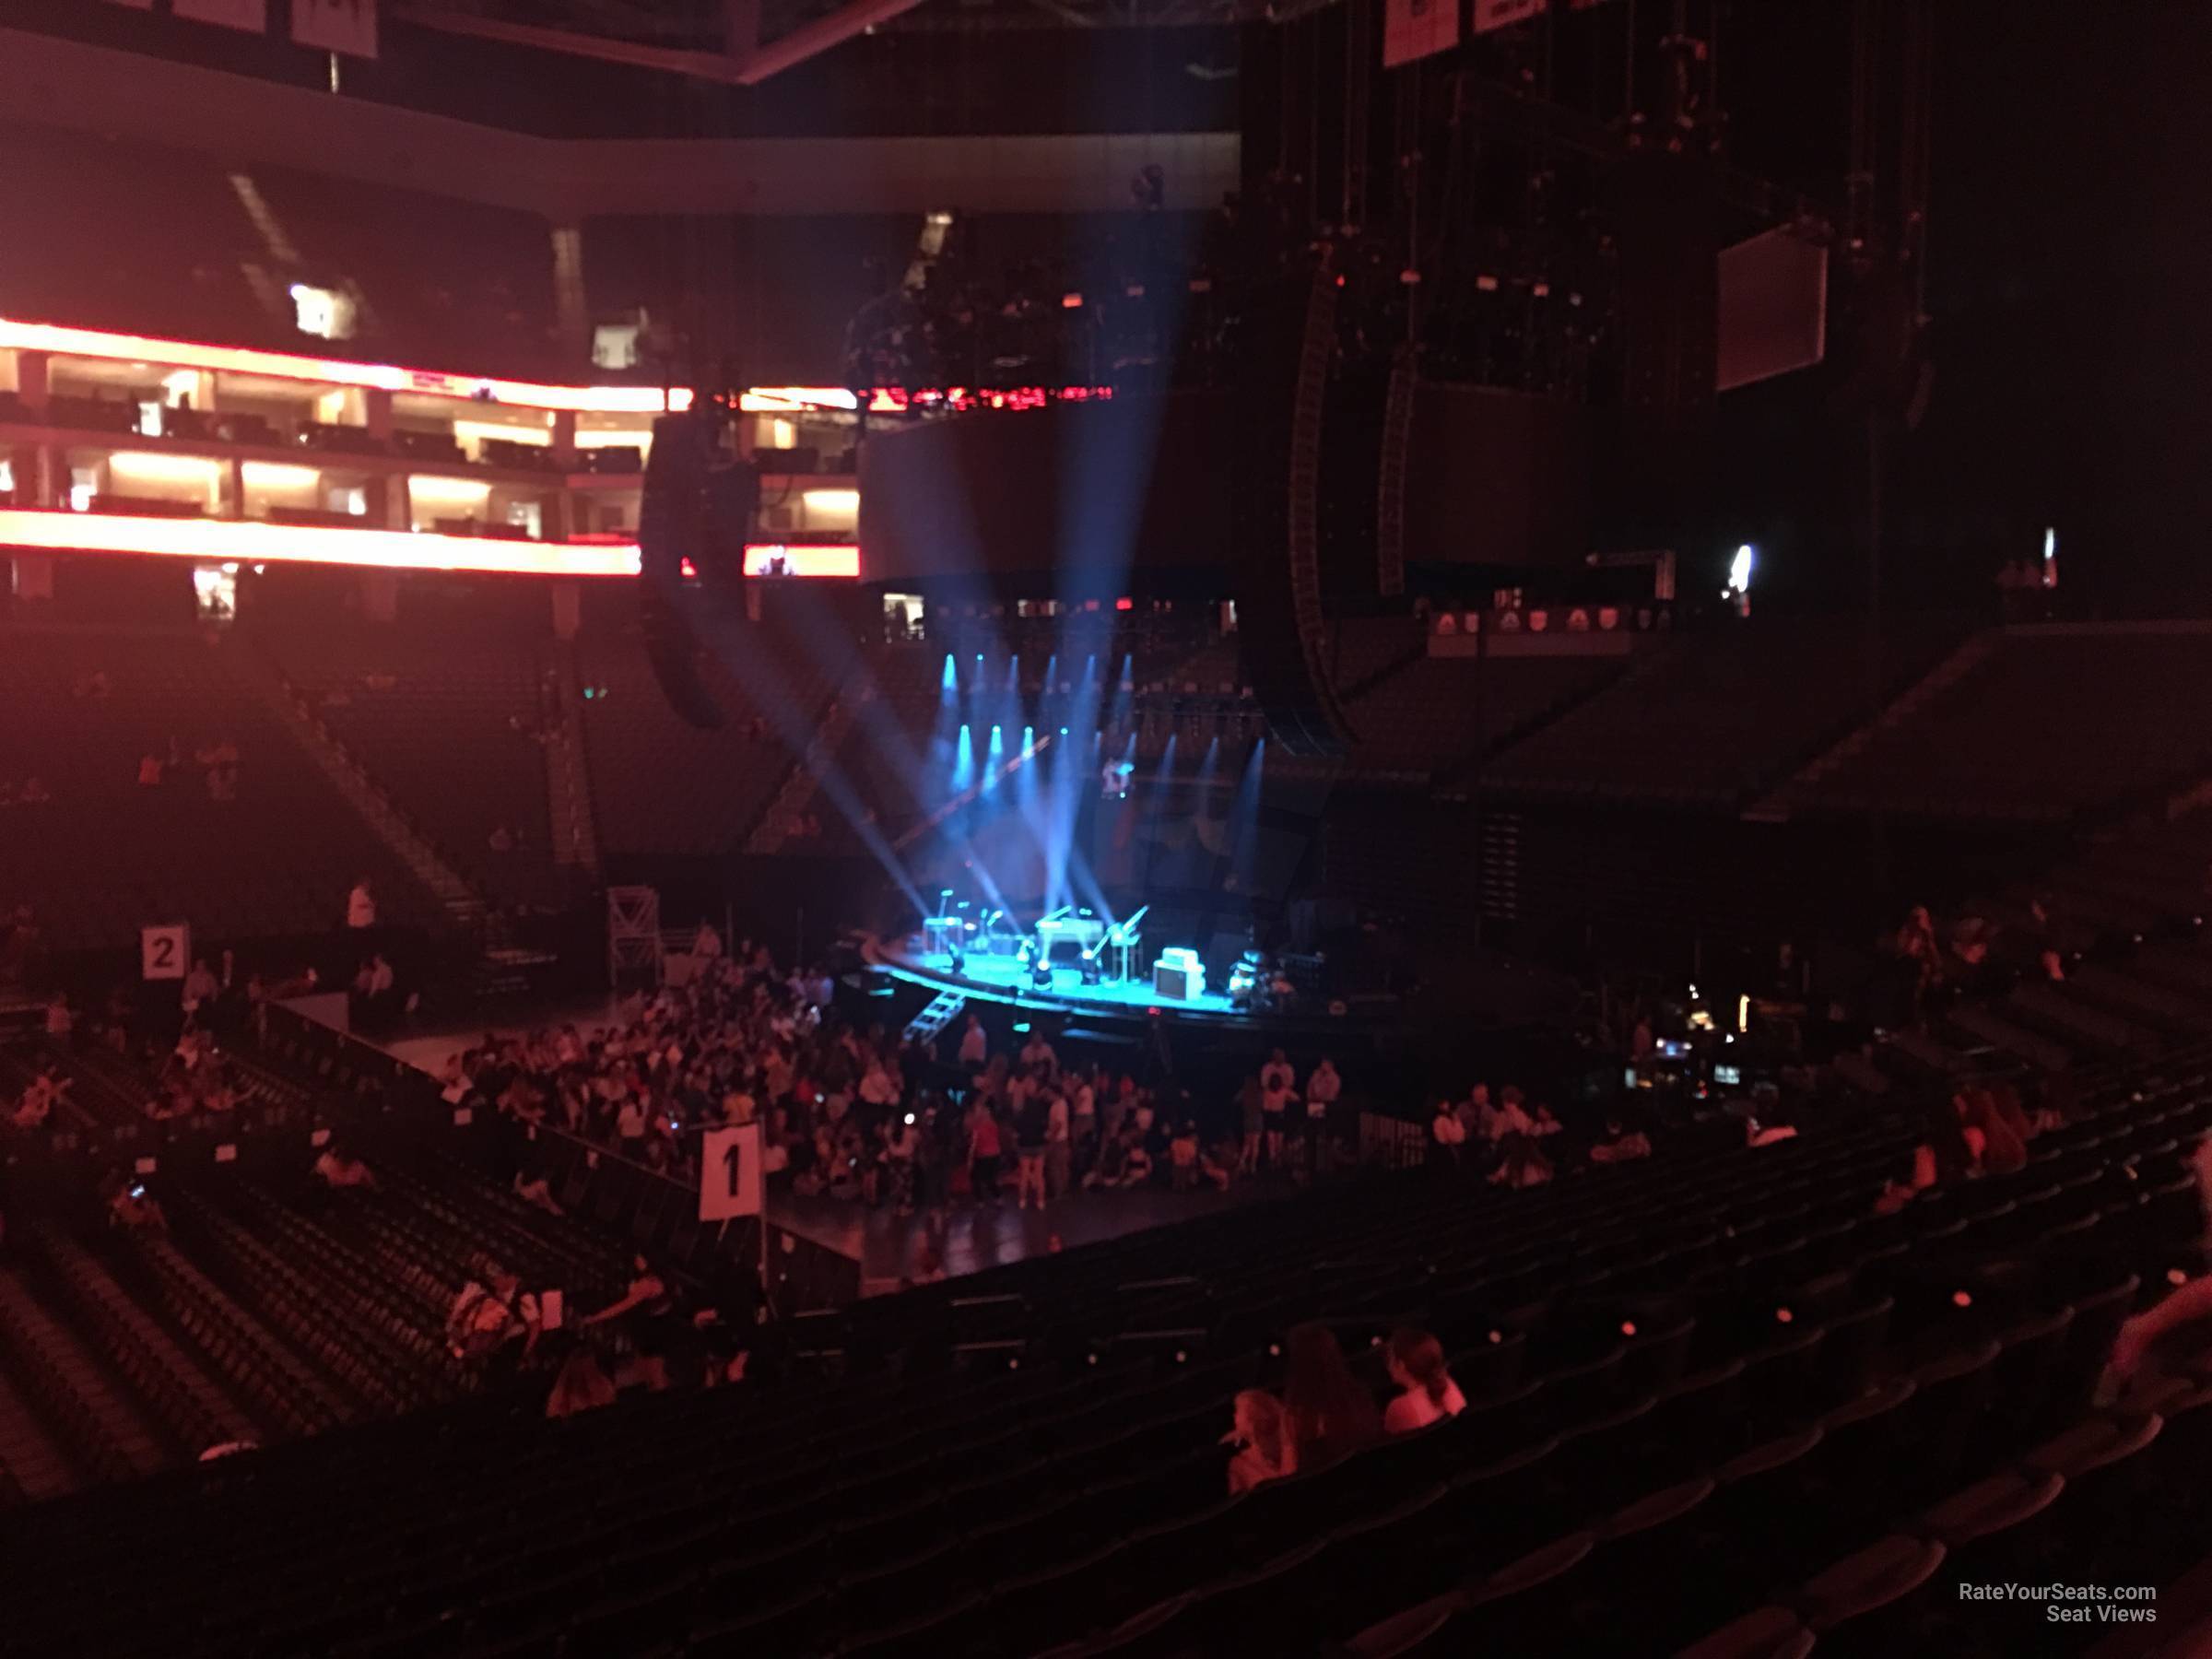 section 107, row m seat view  for concert - golden 1 center